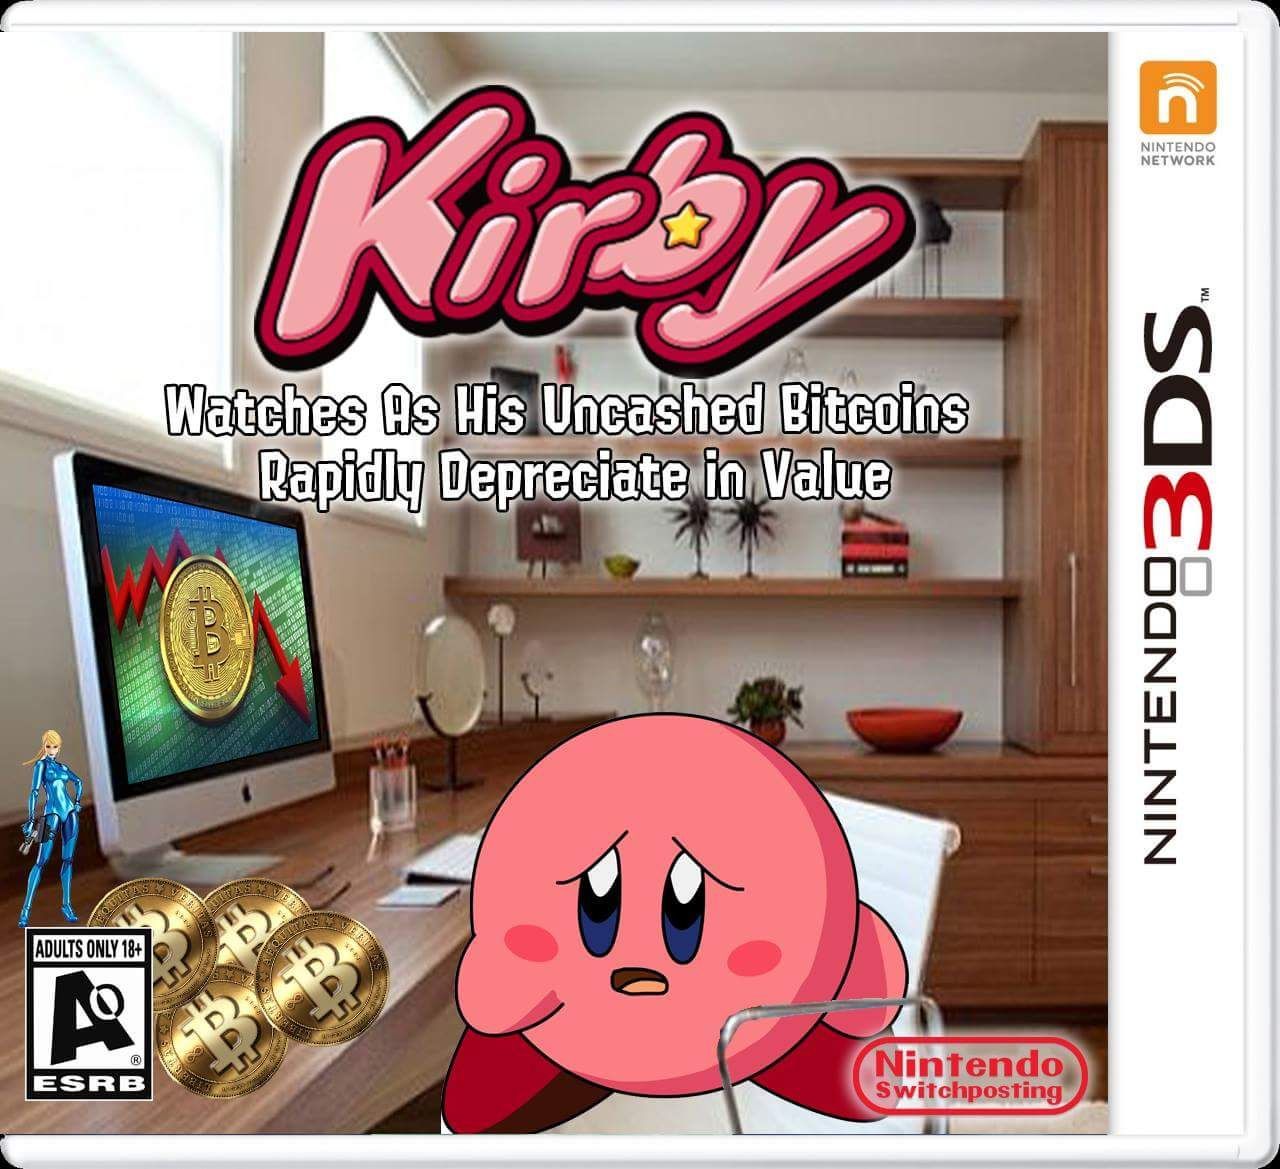 Kirby Watches As His Uncashed Bitcoins Rapidly Depreciate in Value - meme